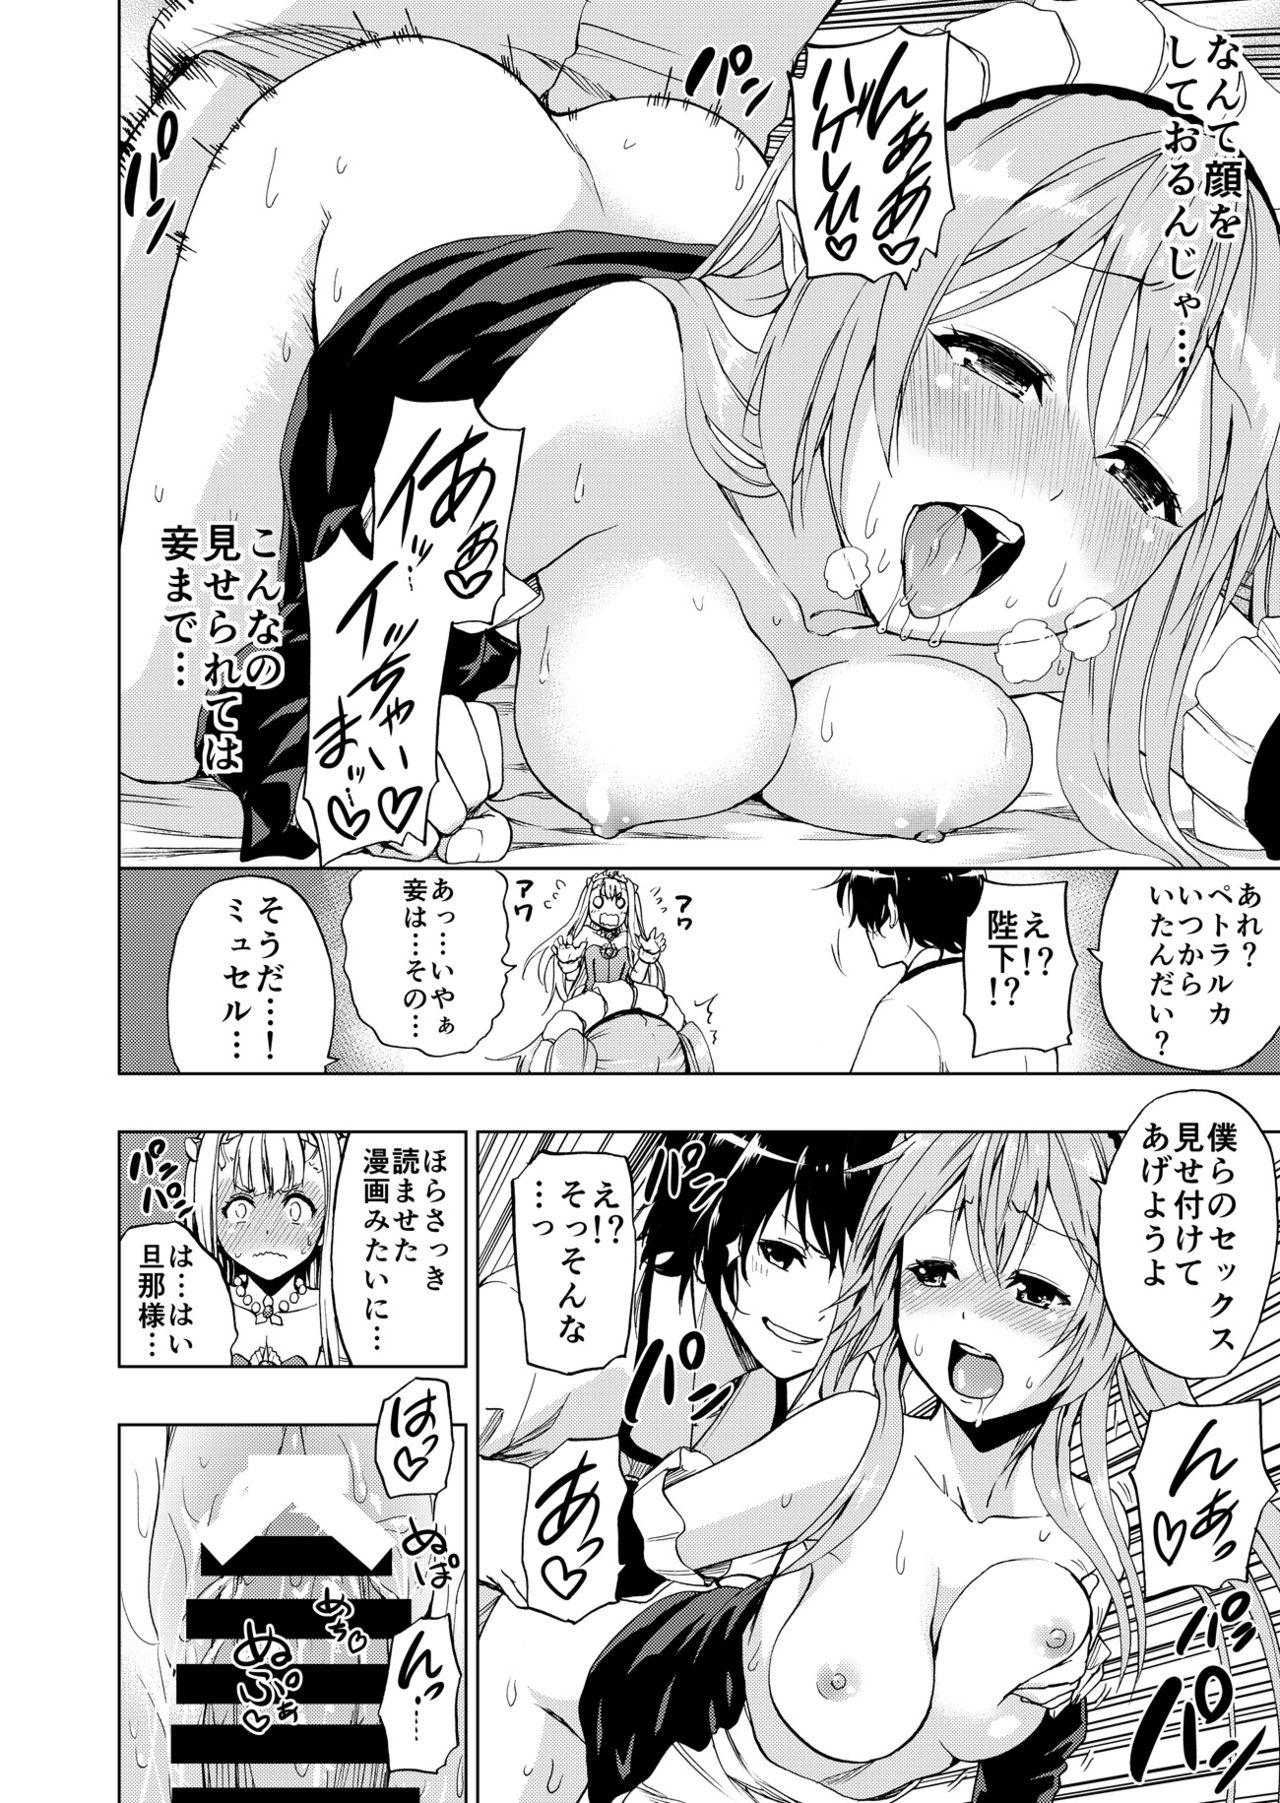 Glamour Outbreak Harem - Outbreak company Hot Pussy - Page 11